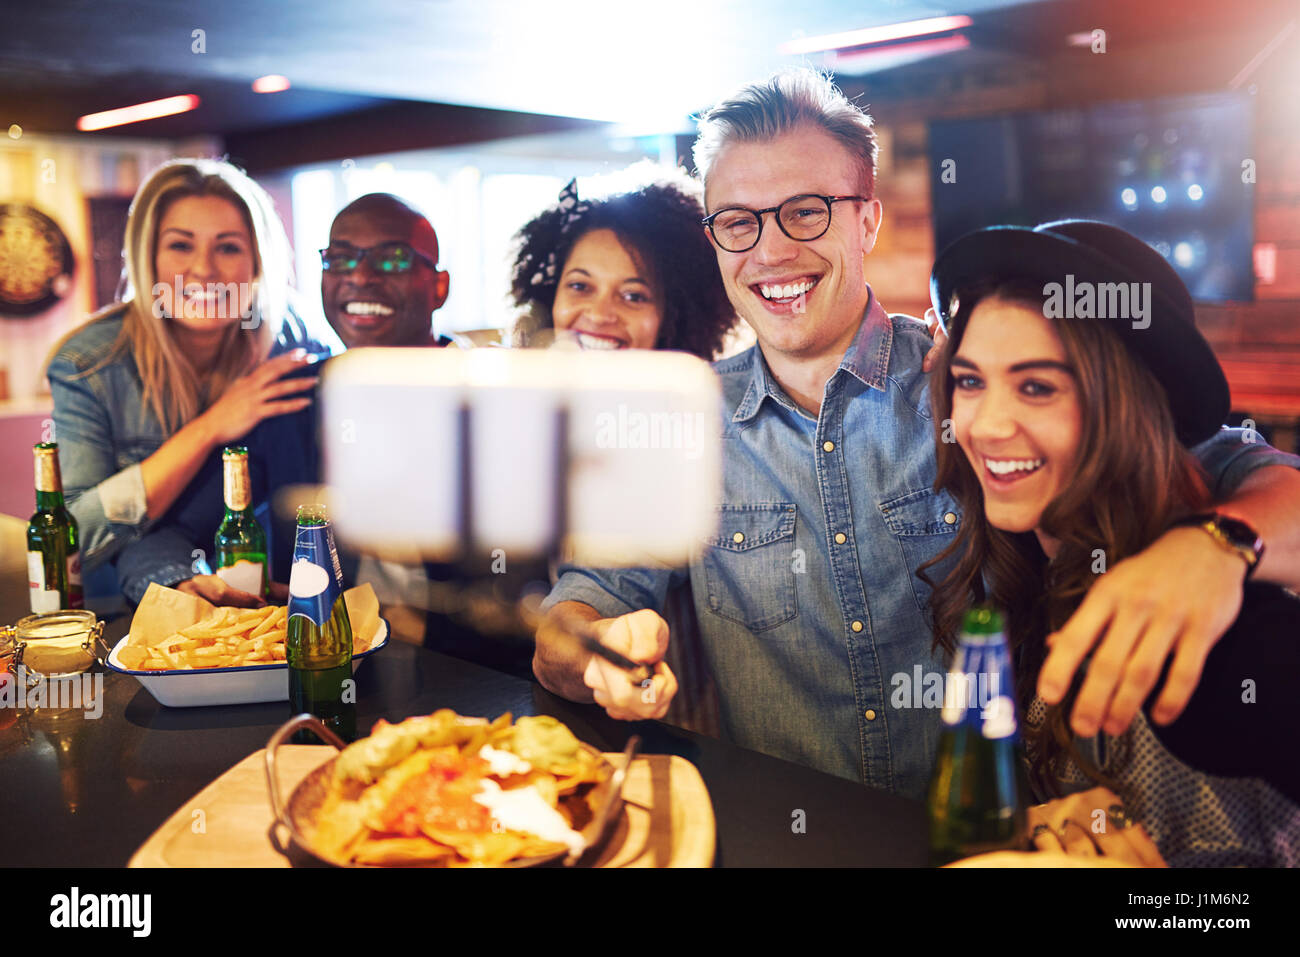 Horizontal shot of smiling people taking a selfie on the smartphone inside the bar. Stock Photo